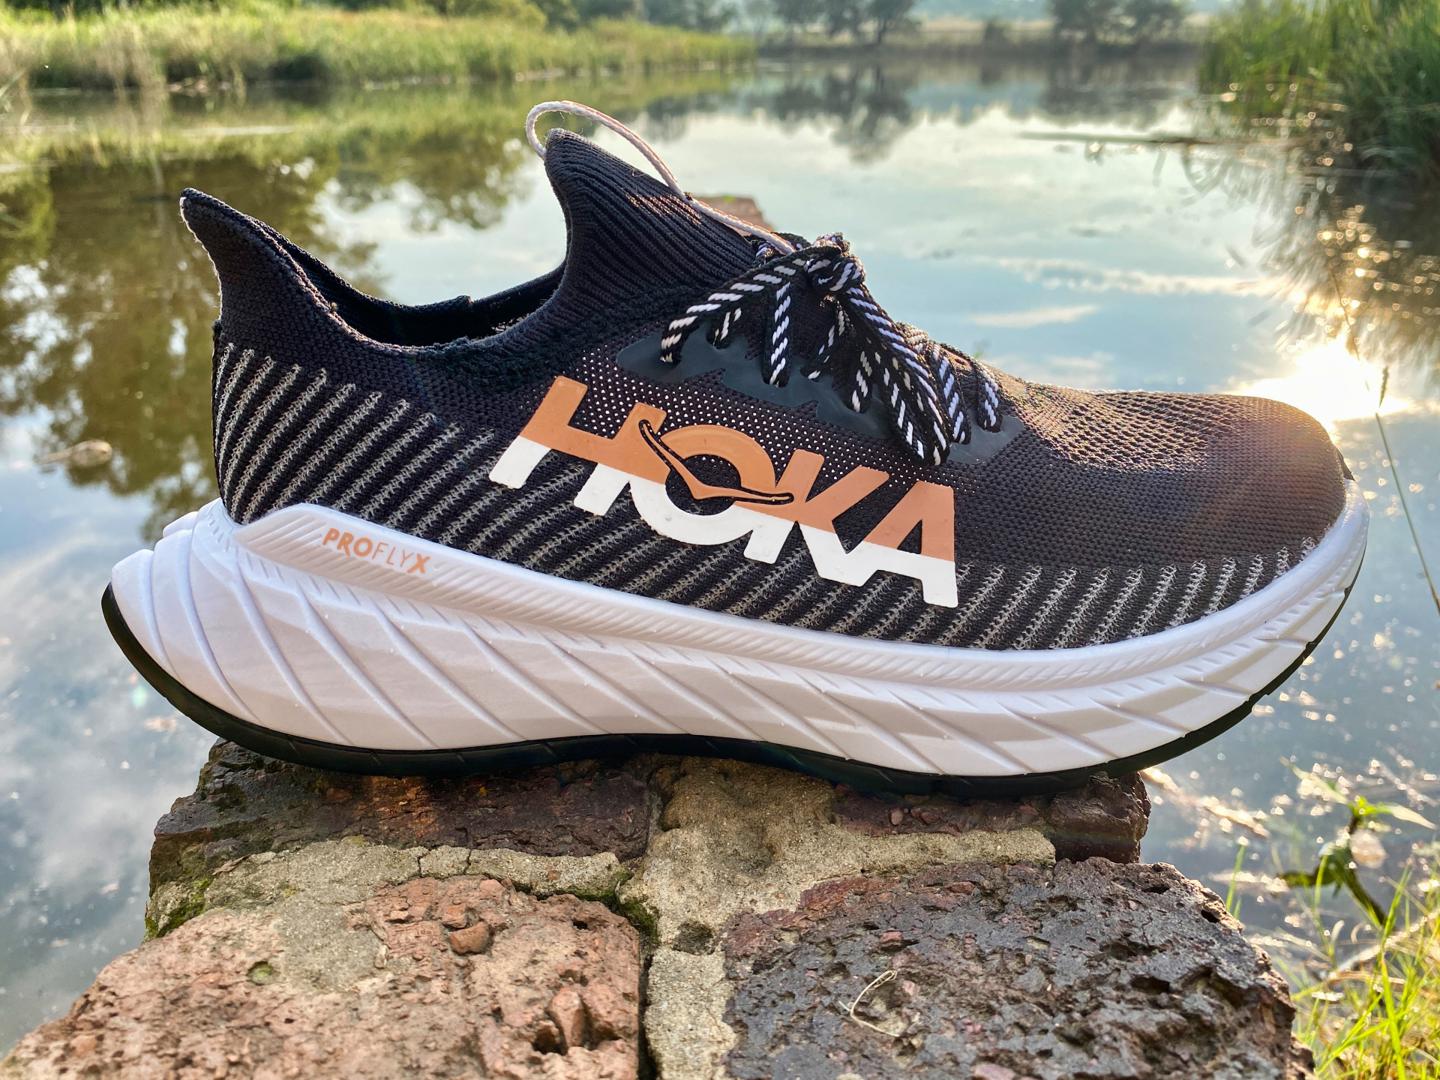 How To Clean Hoka Running Shoes